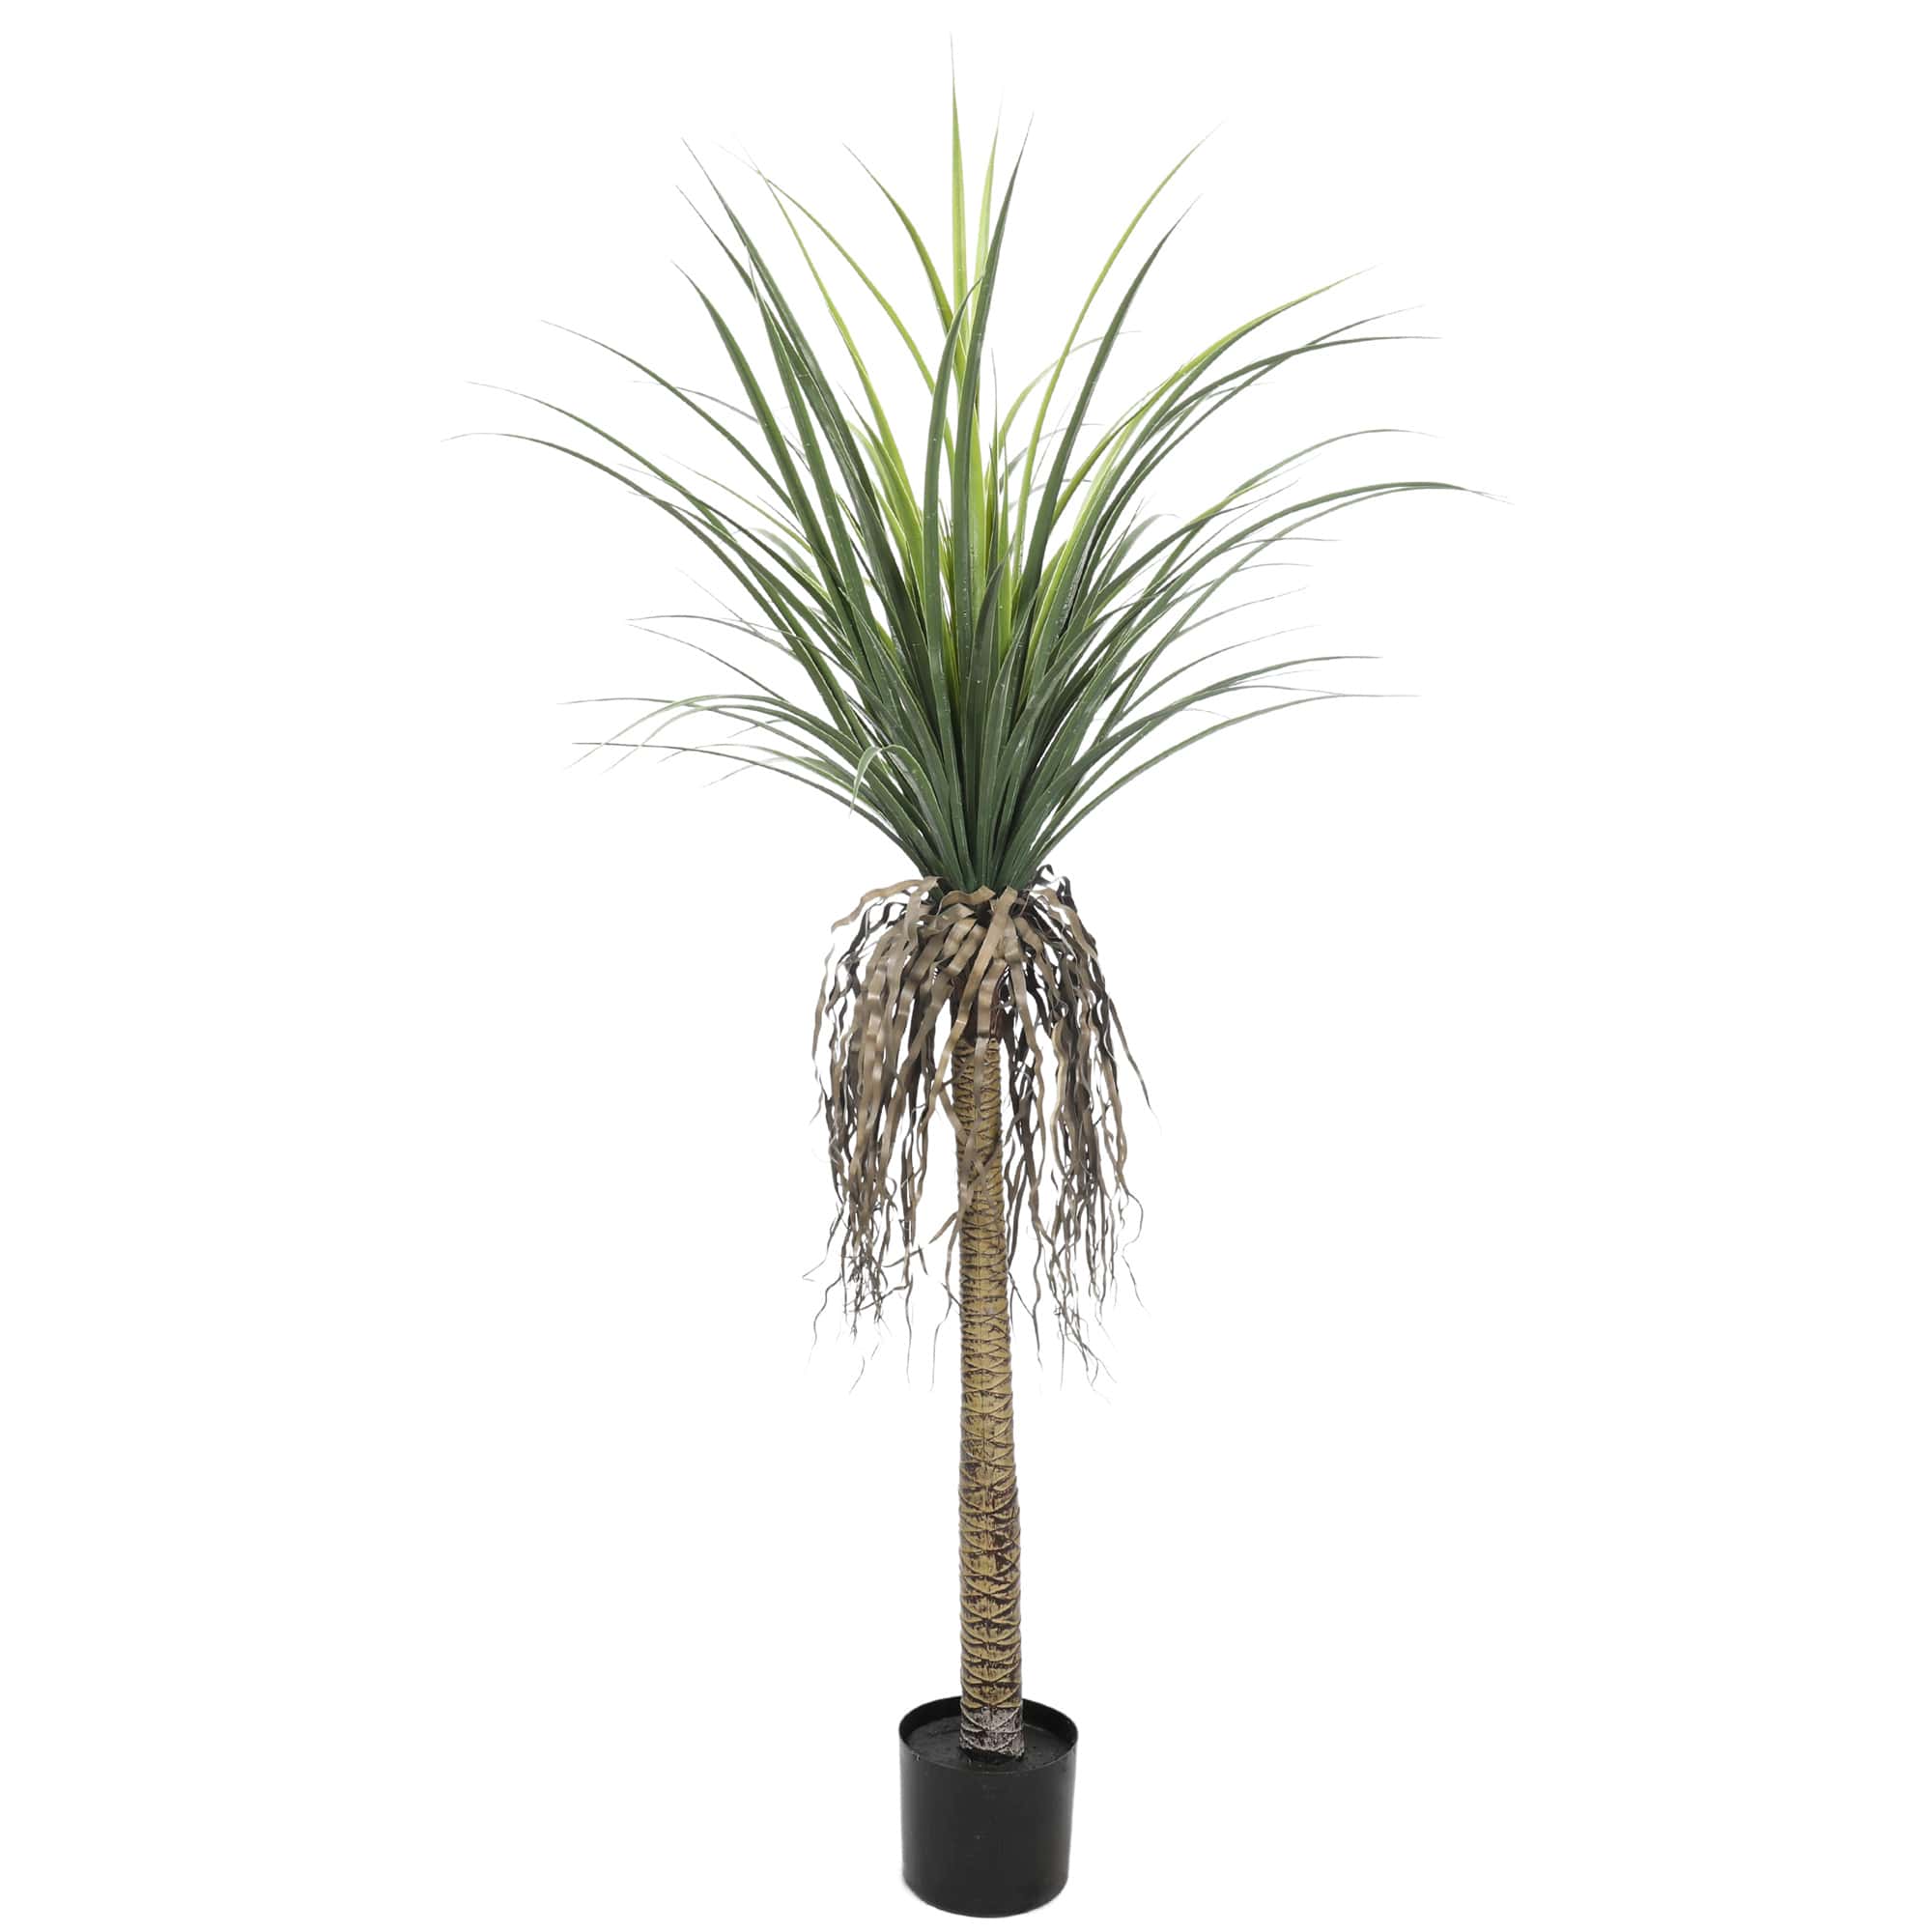 potted-artificial-yucca-tree-with-tall-head-150cm-uv-resistant-backorder-337305-2.jpg